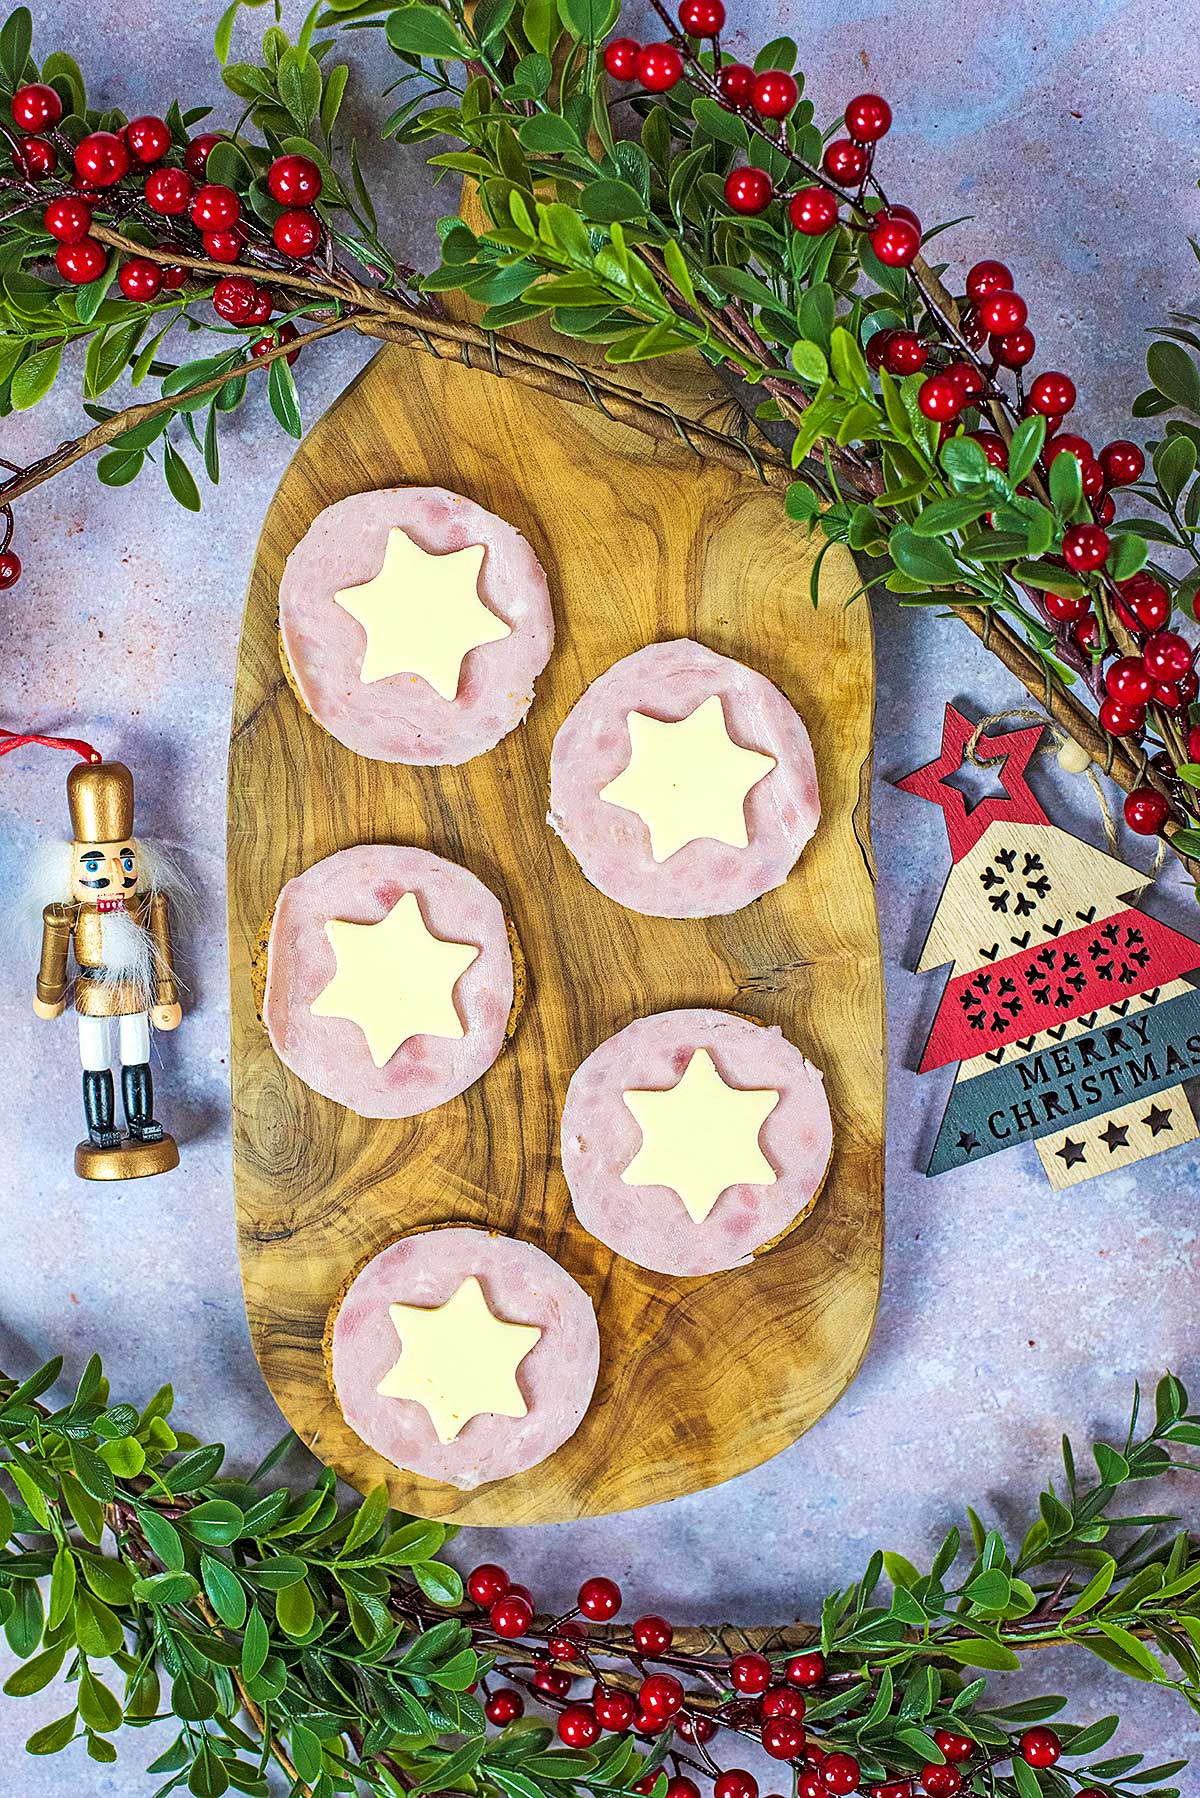 A serving board with crackers, ham and star shaped cheese.